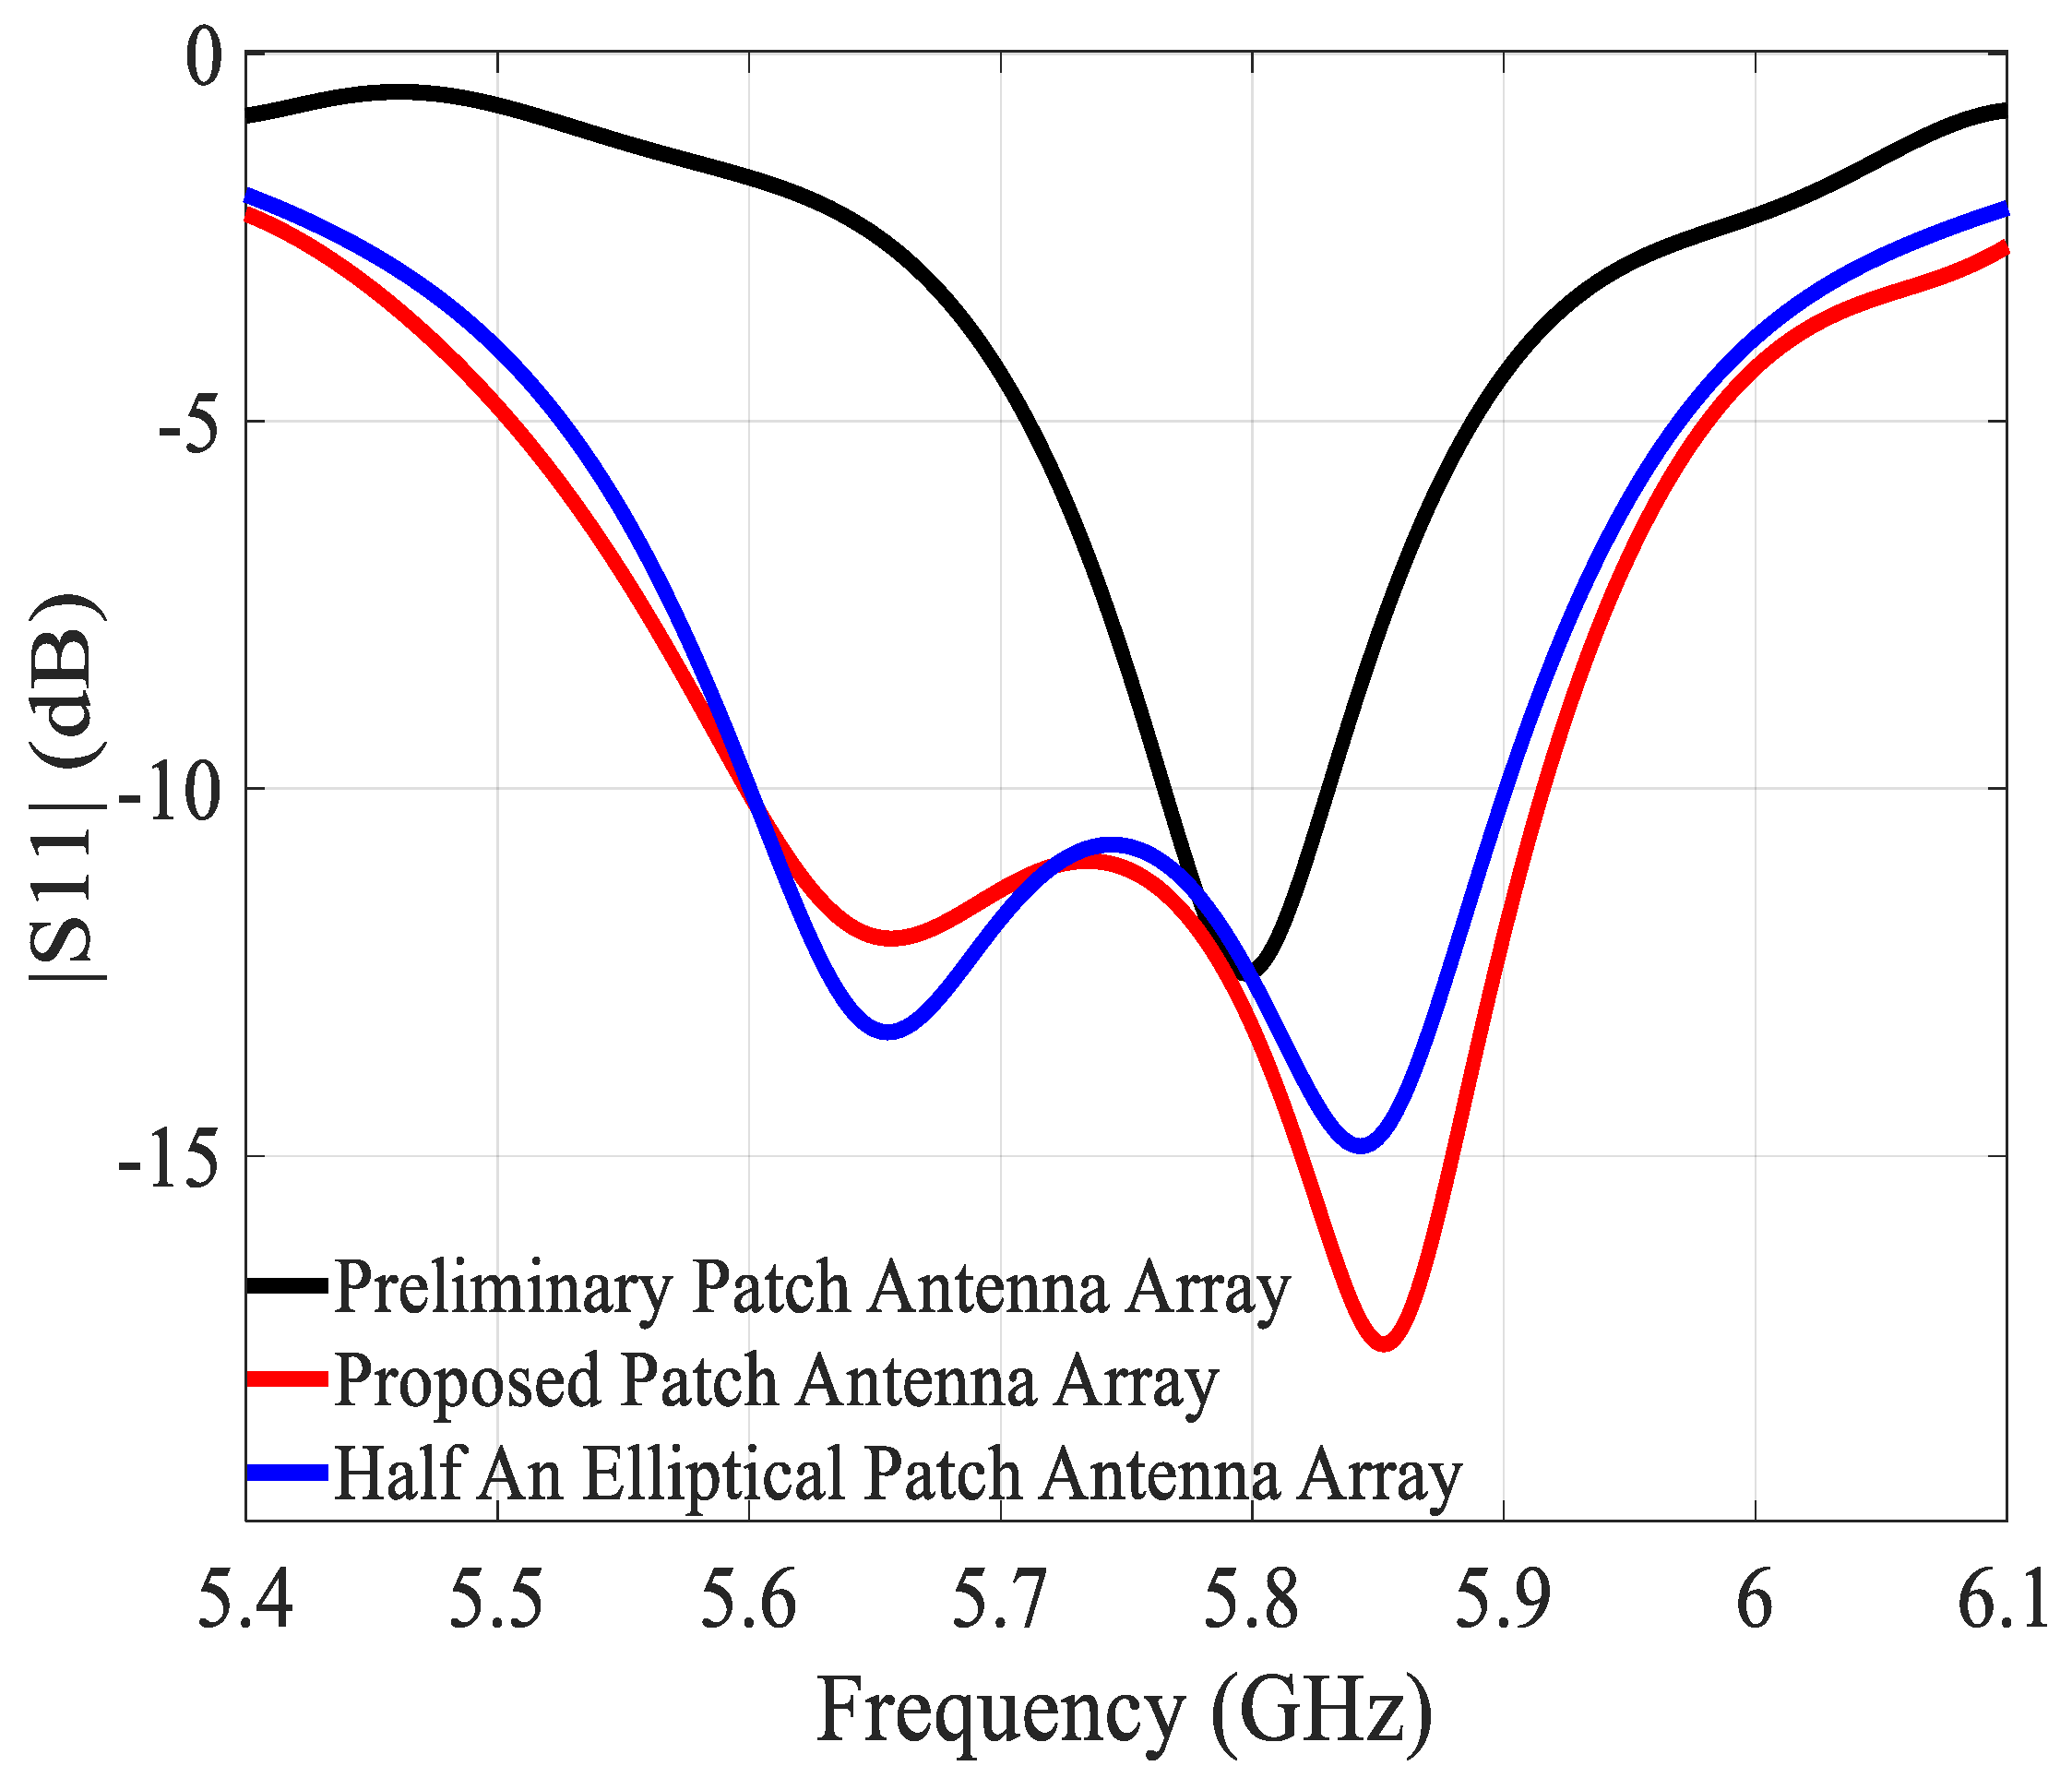 Profile of the antenna array. W = 12.6 mm, p = 3 mm, ls = 8 mm